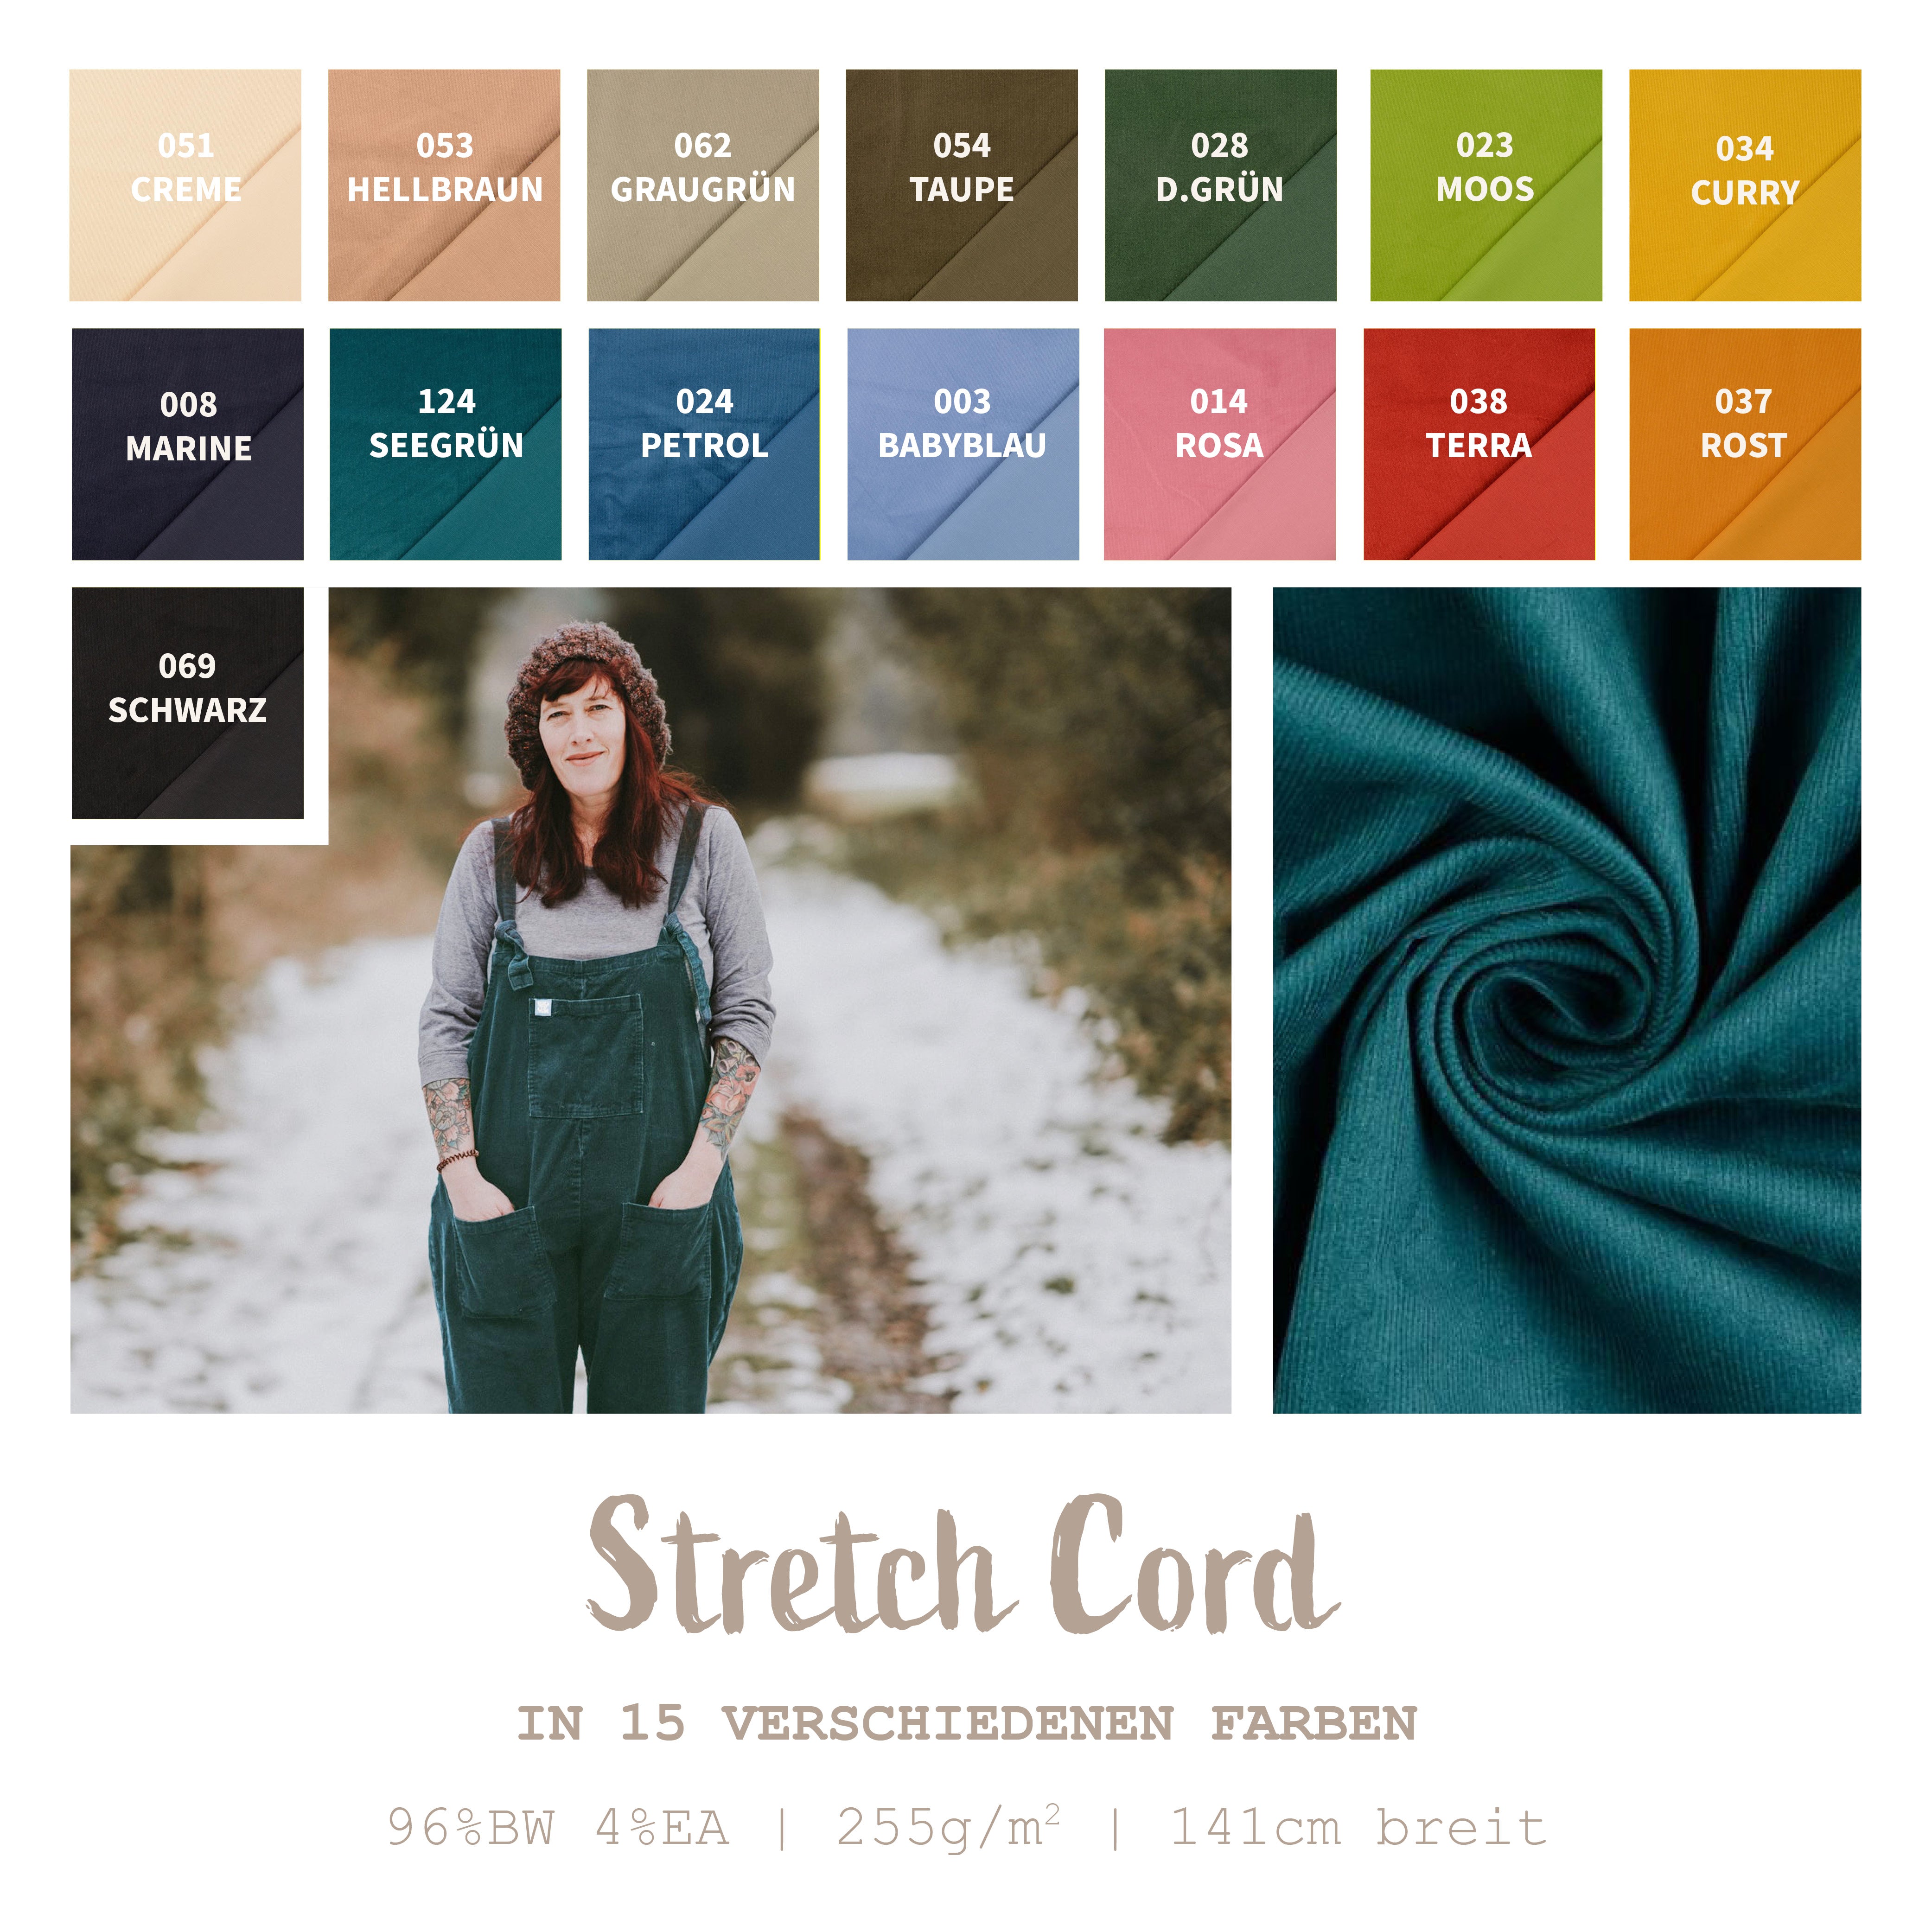 Stretch cord *From 50 cm